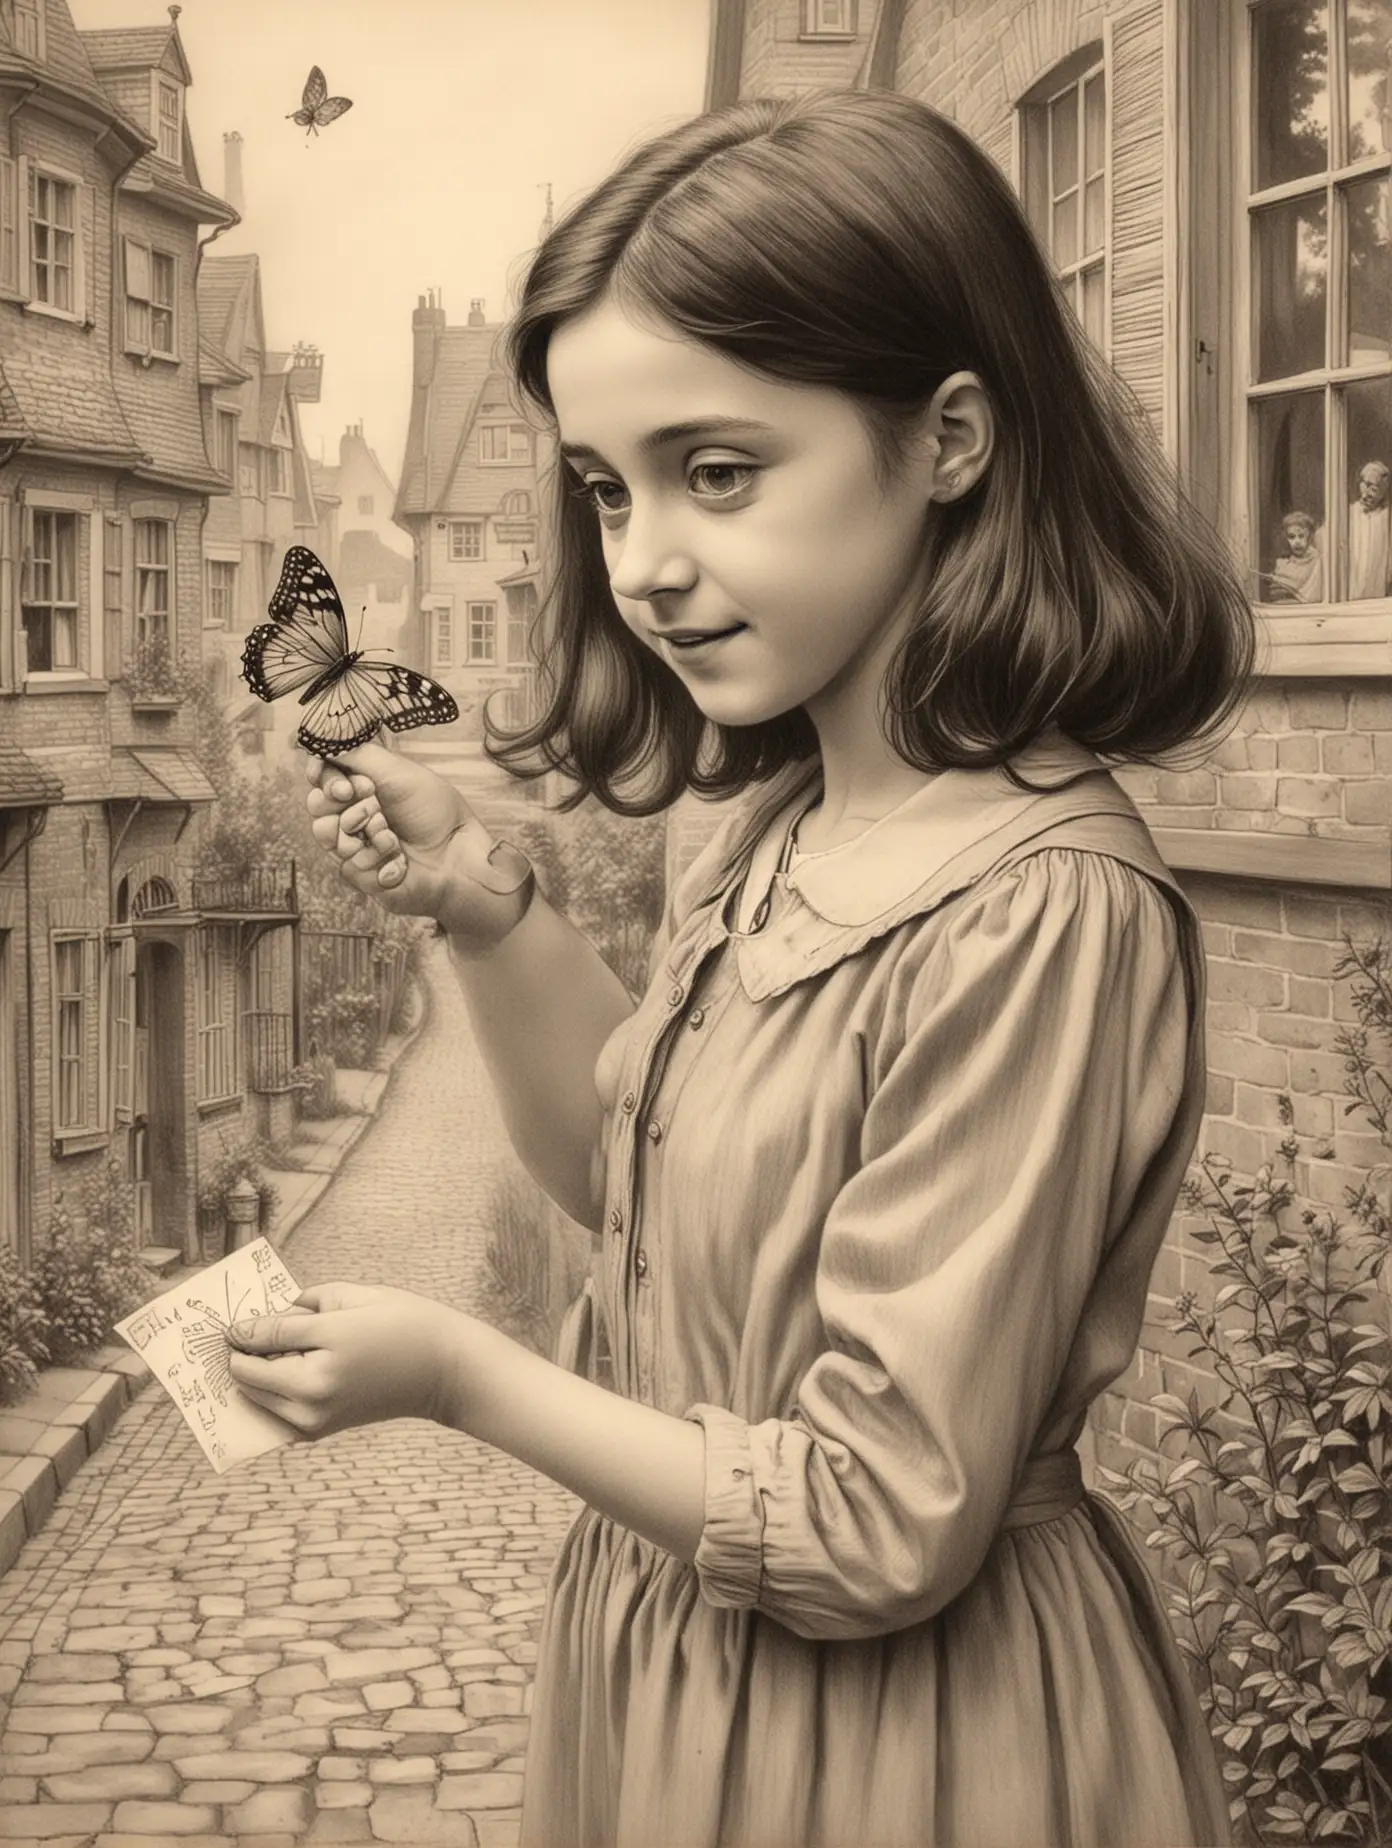 Anne Frank Embracing Nature Innocence and Curiosity at Home